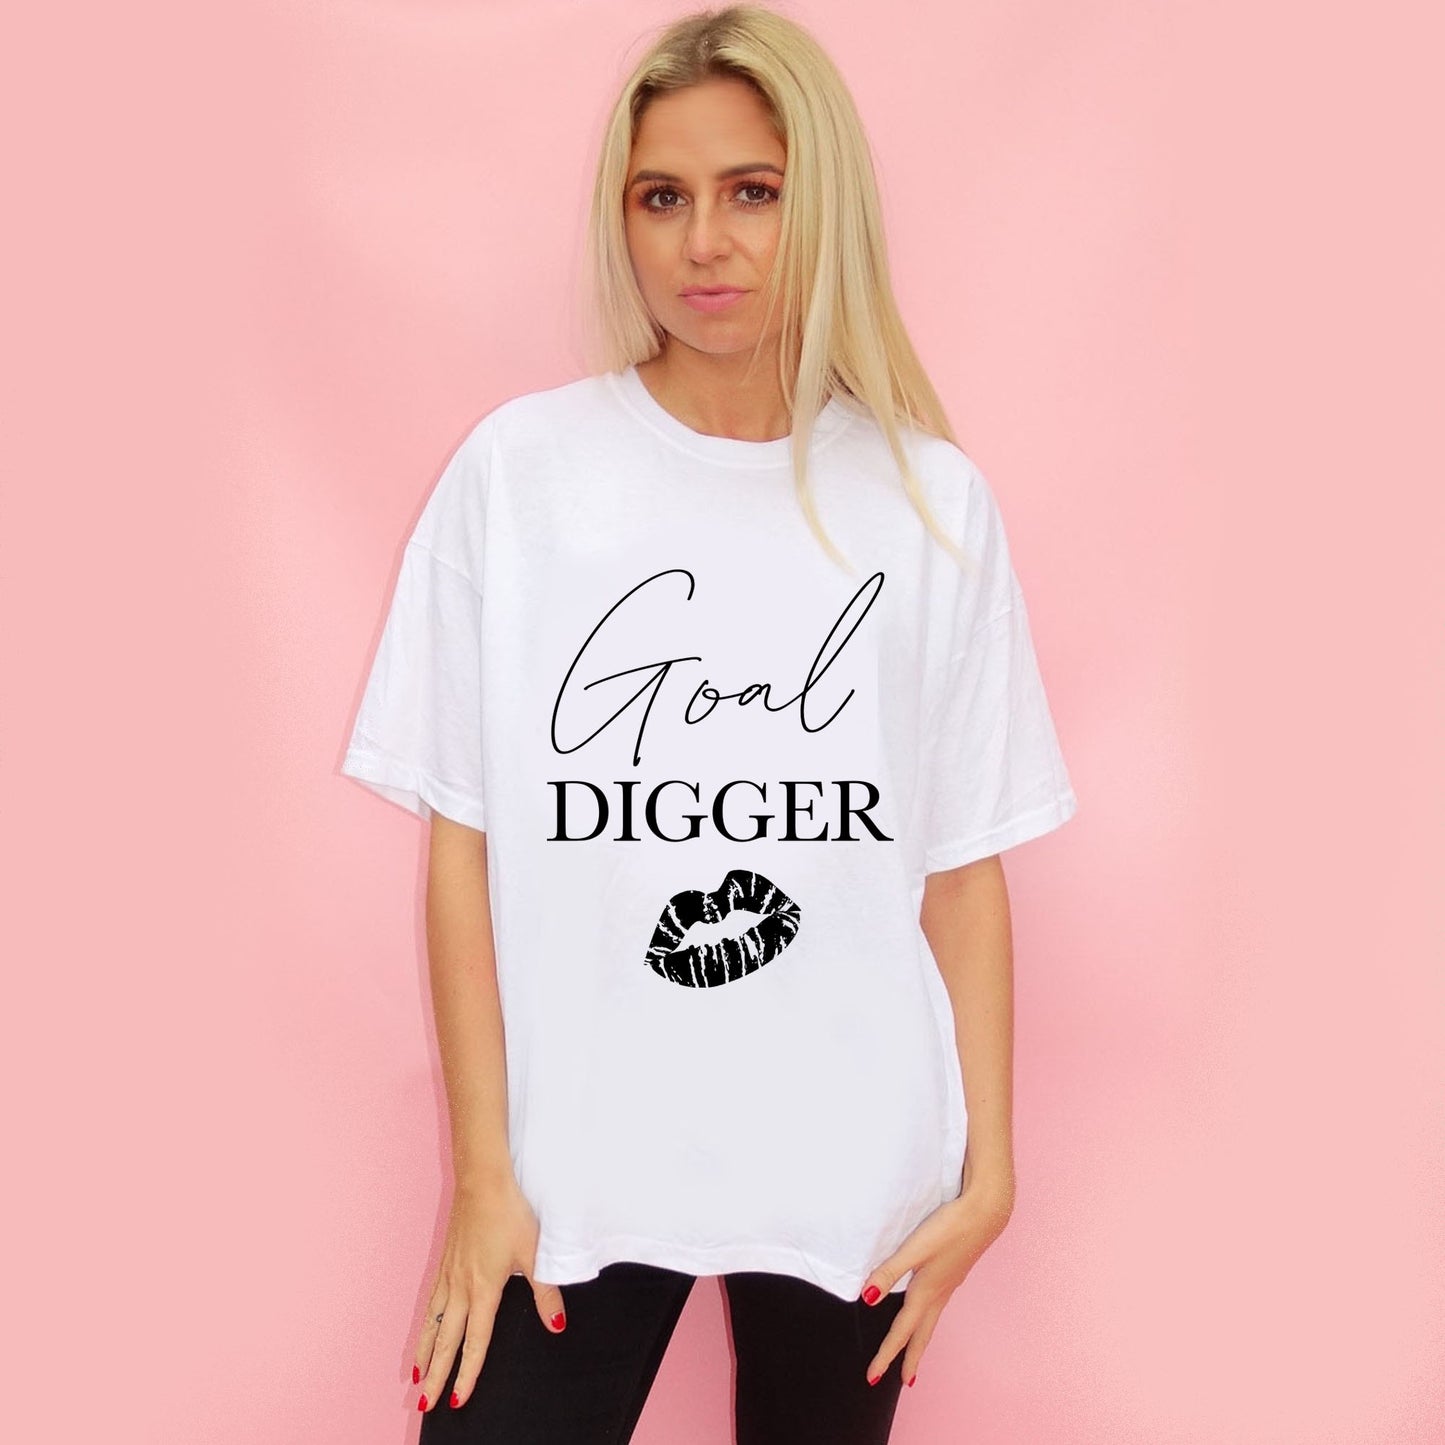 Goal Digger Tshirt In White